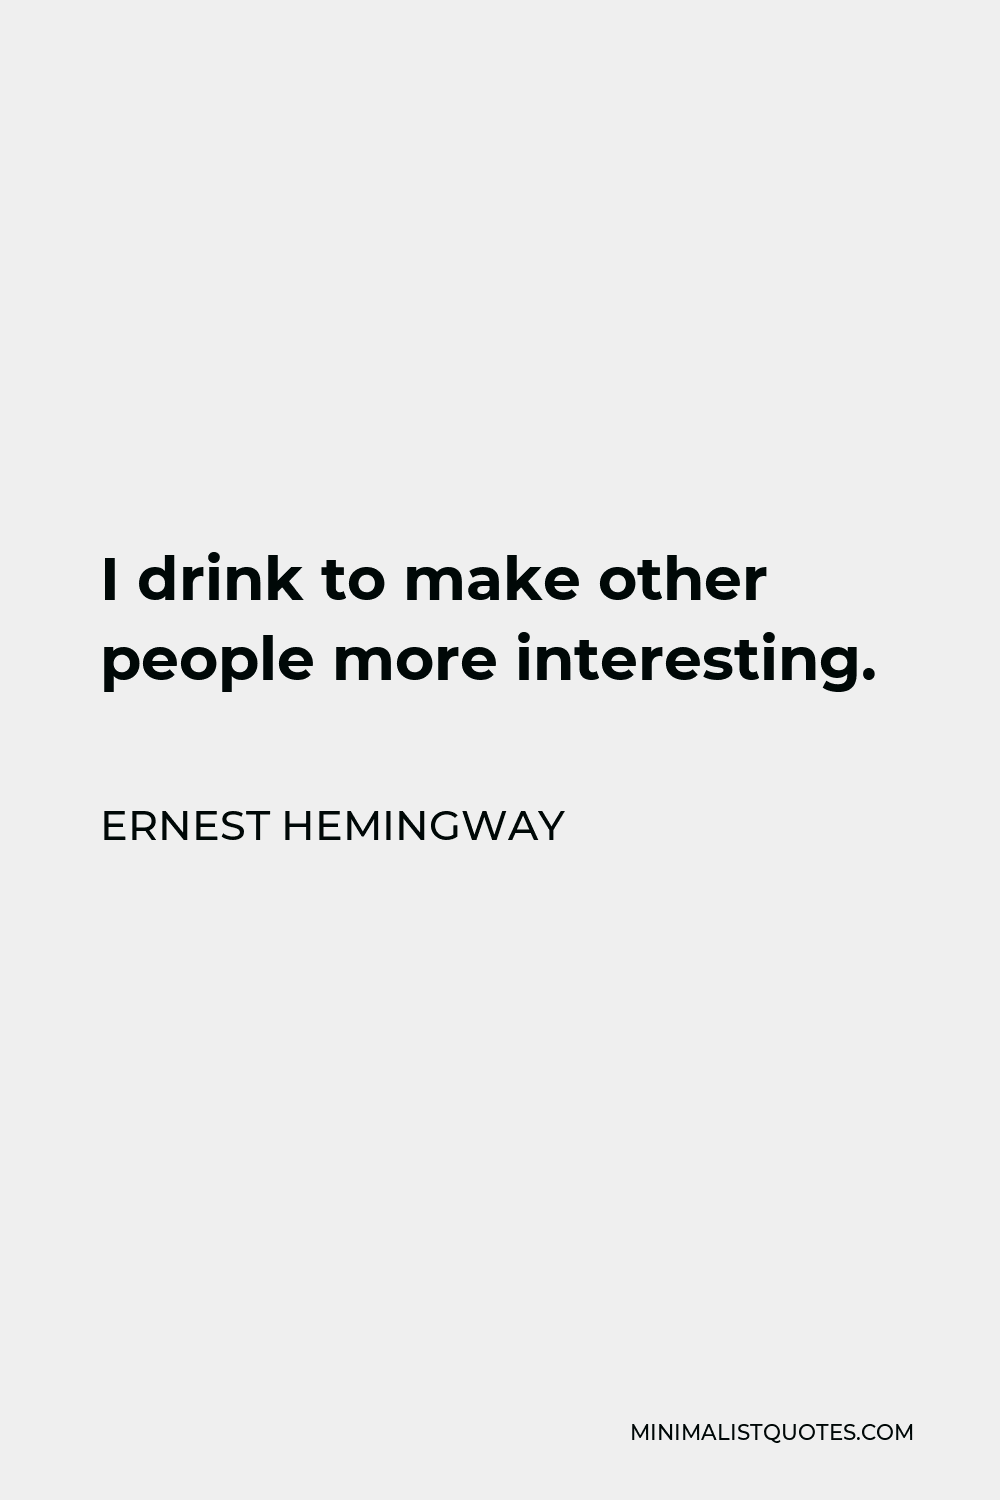 Ernest Hemingway Quote - I drink to make other people more interesting.